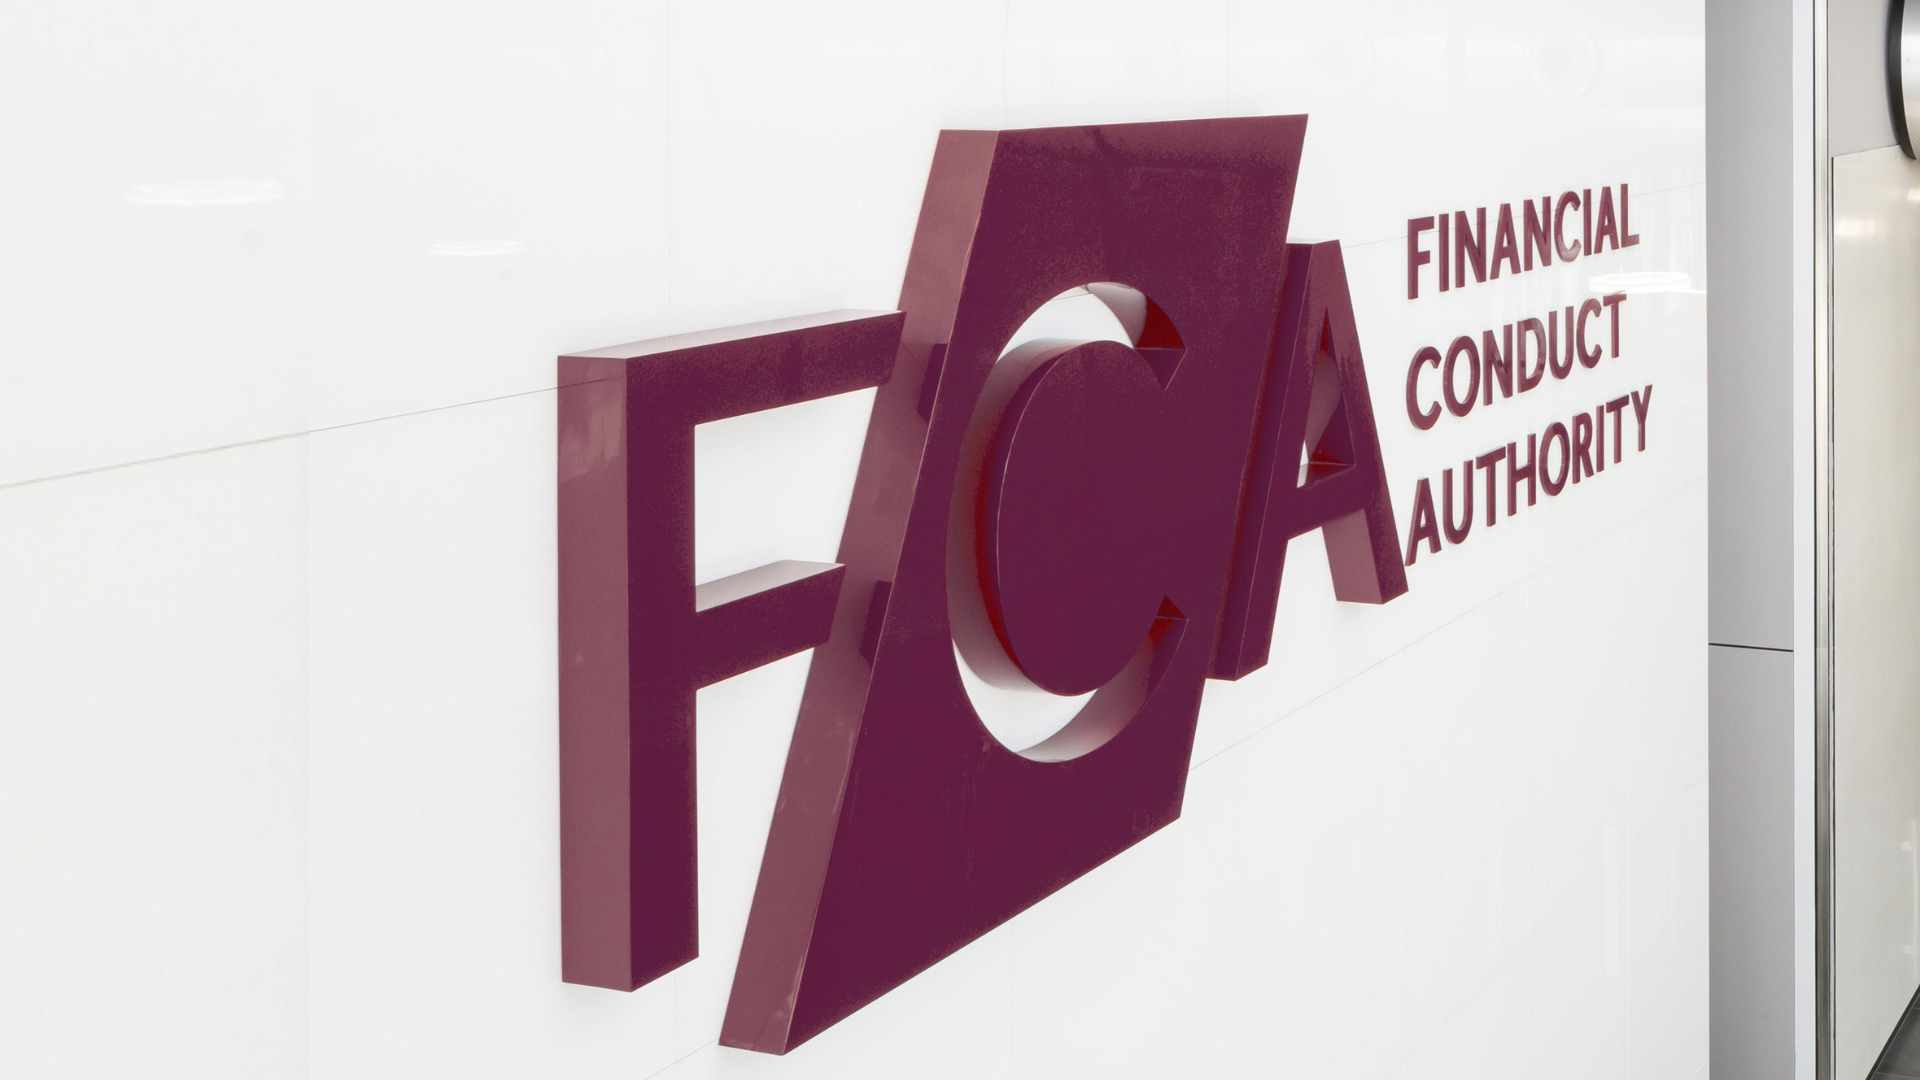 SteelEye-FCA Market Watch 74 - Market Conduct & Transaction Reporting Issues